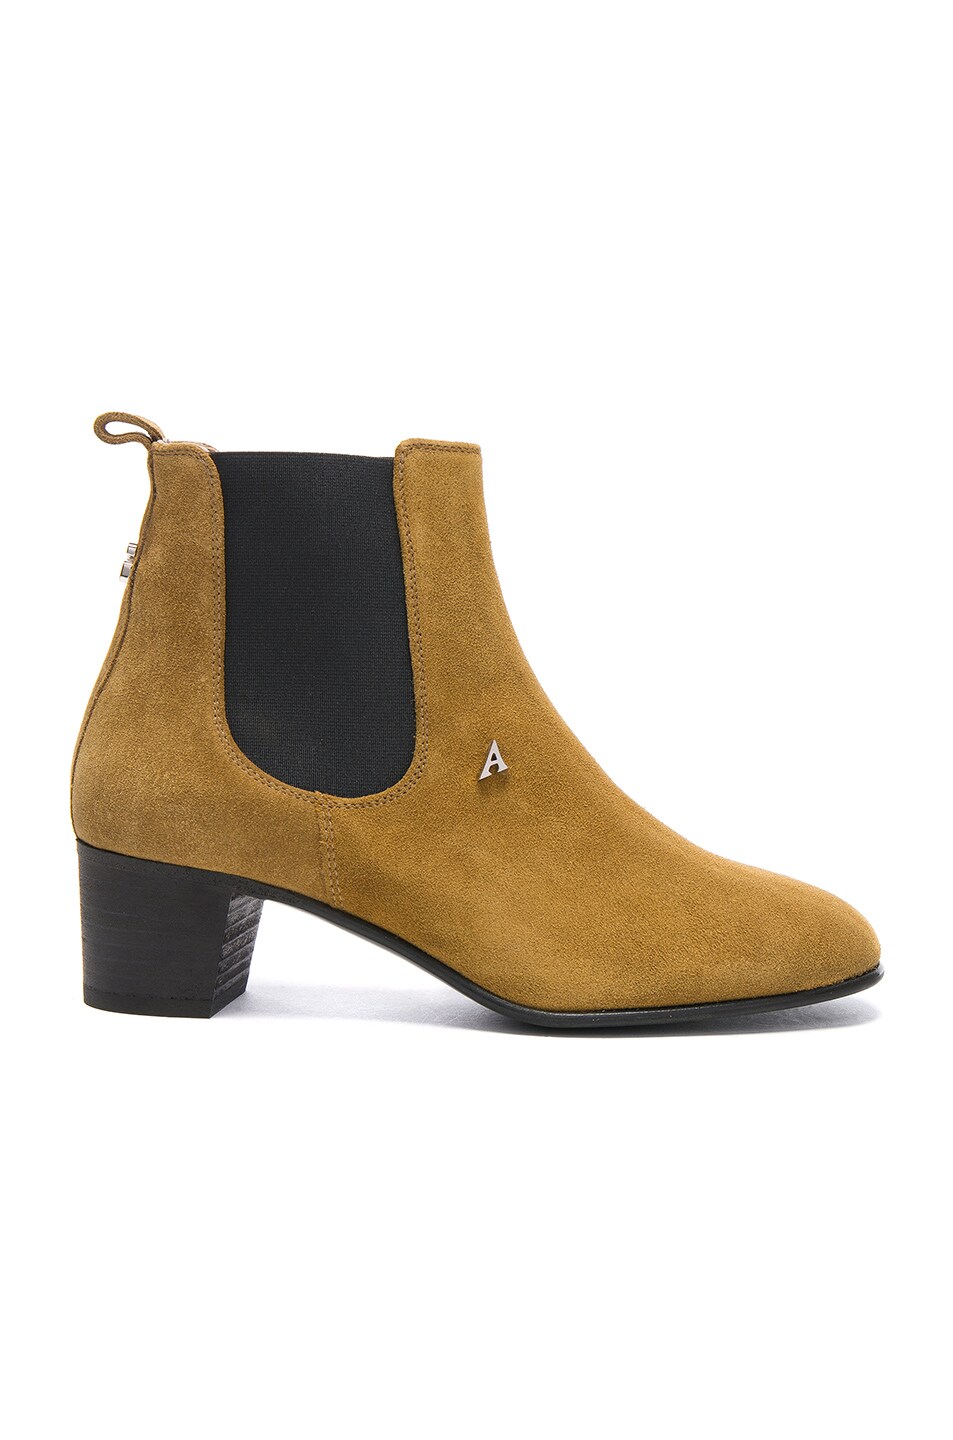 Image 1 of Acne Studios Suede Hely Boots in Dark Sand